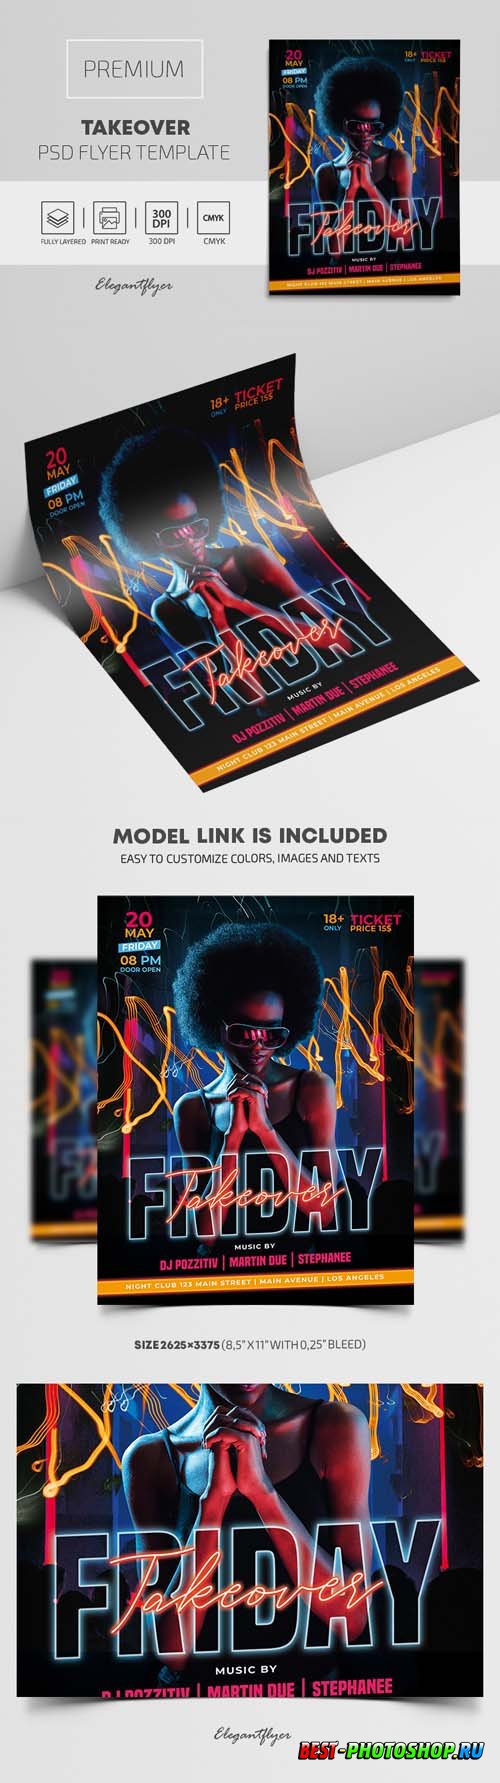 Friday Takeover Party Premium PSD Flyer Template